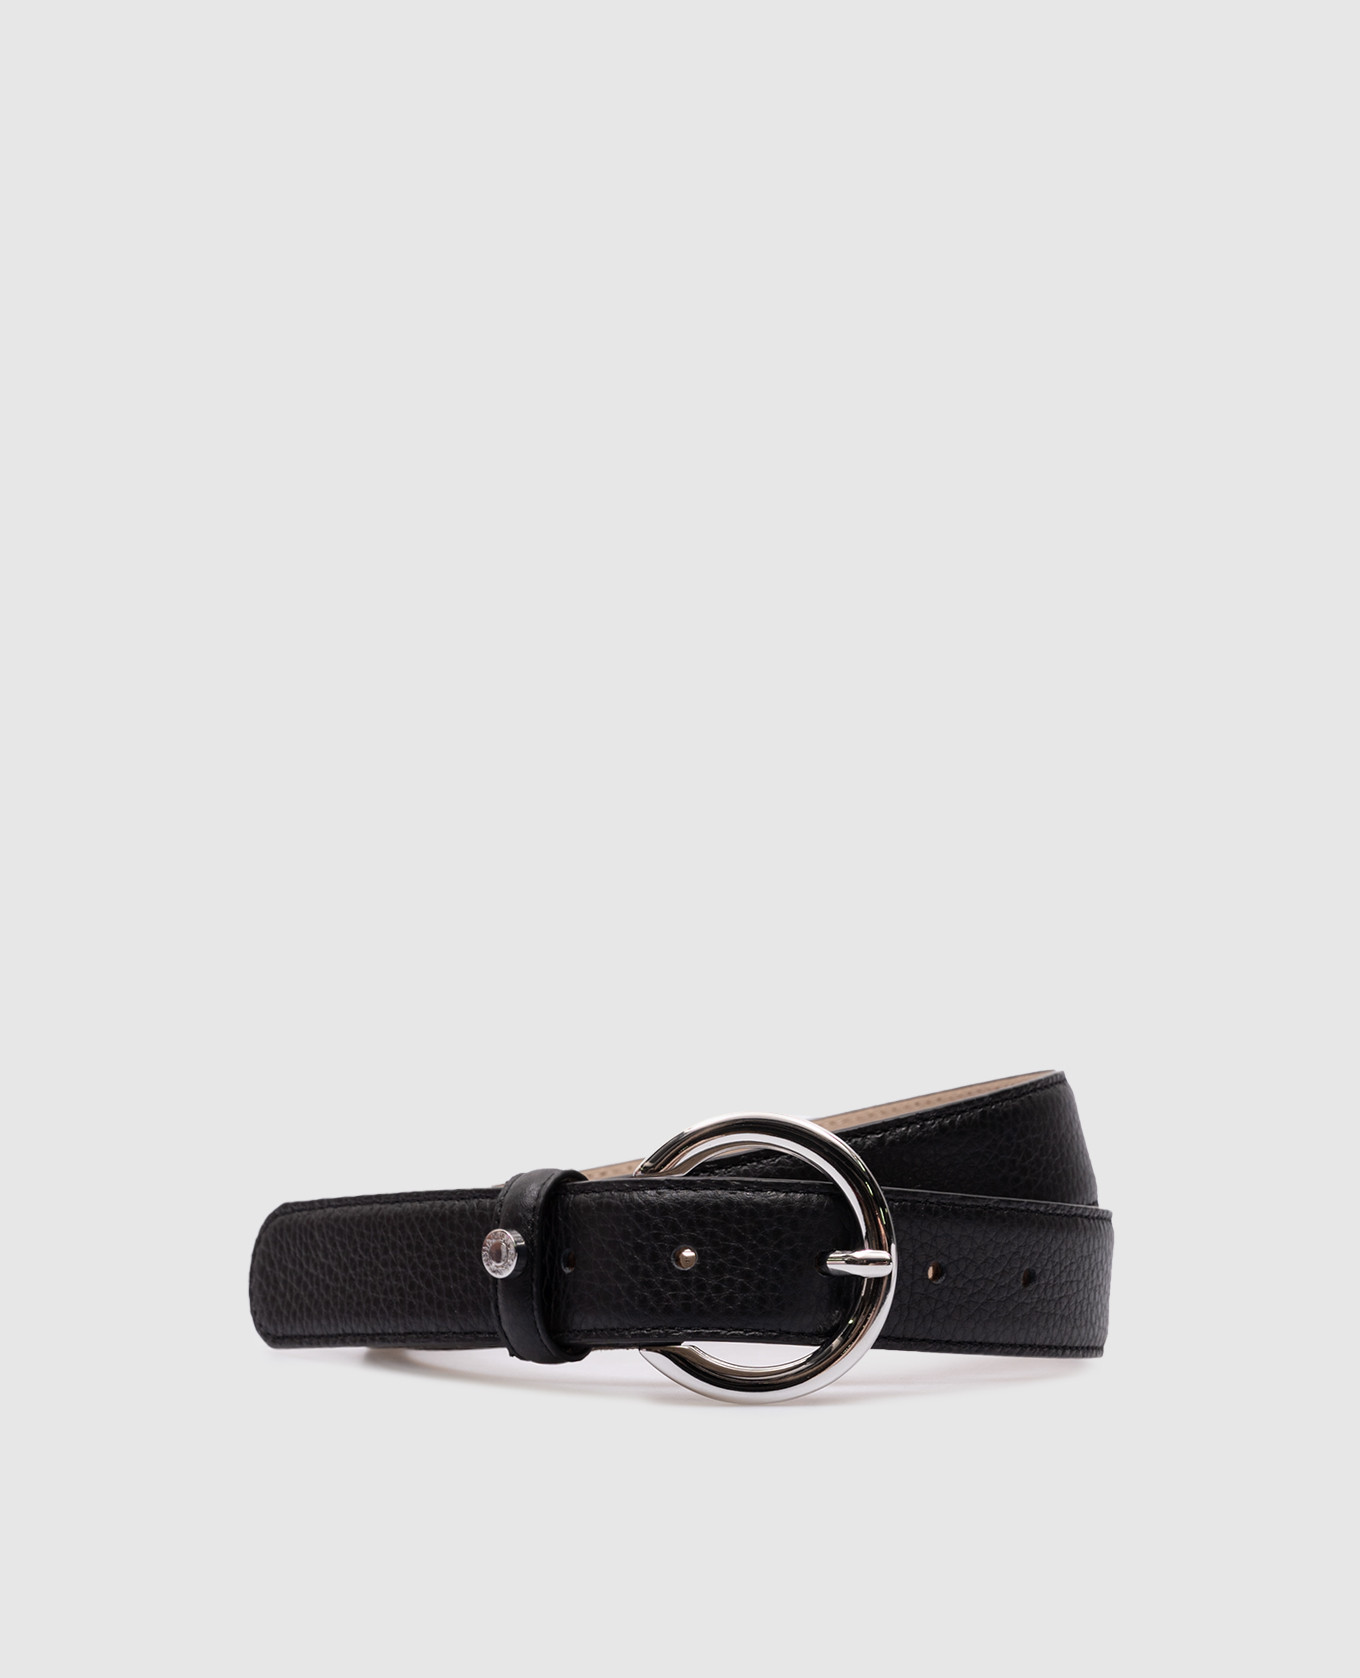 Black leather belt with embossed grain